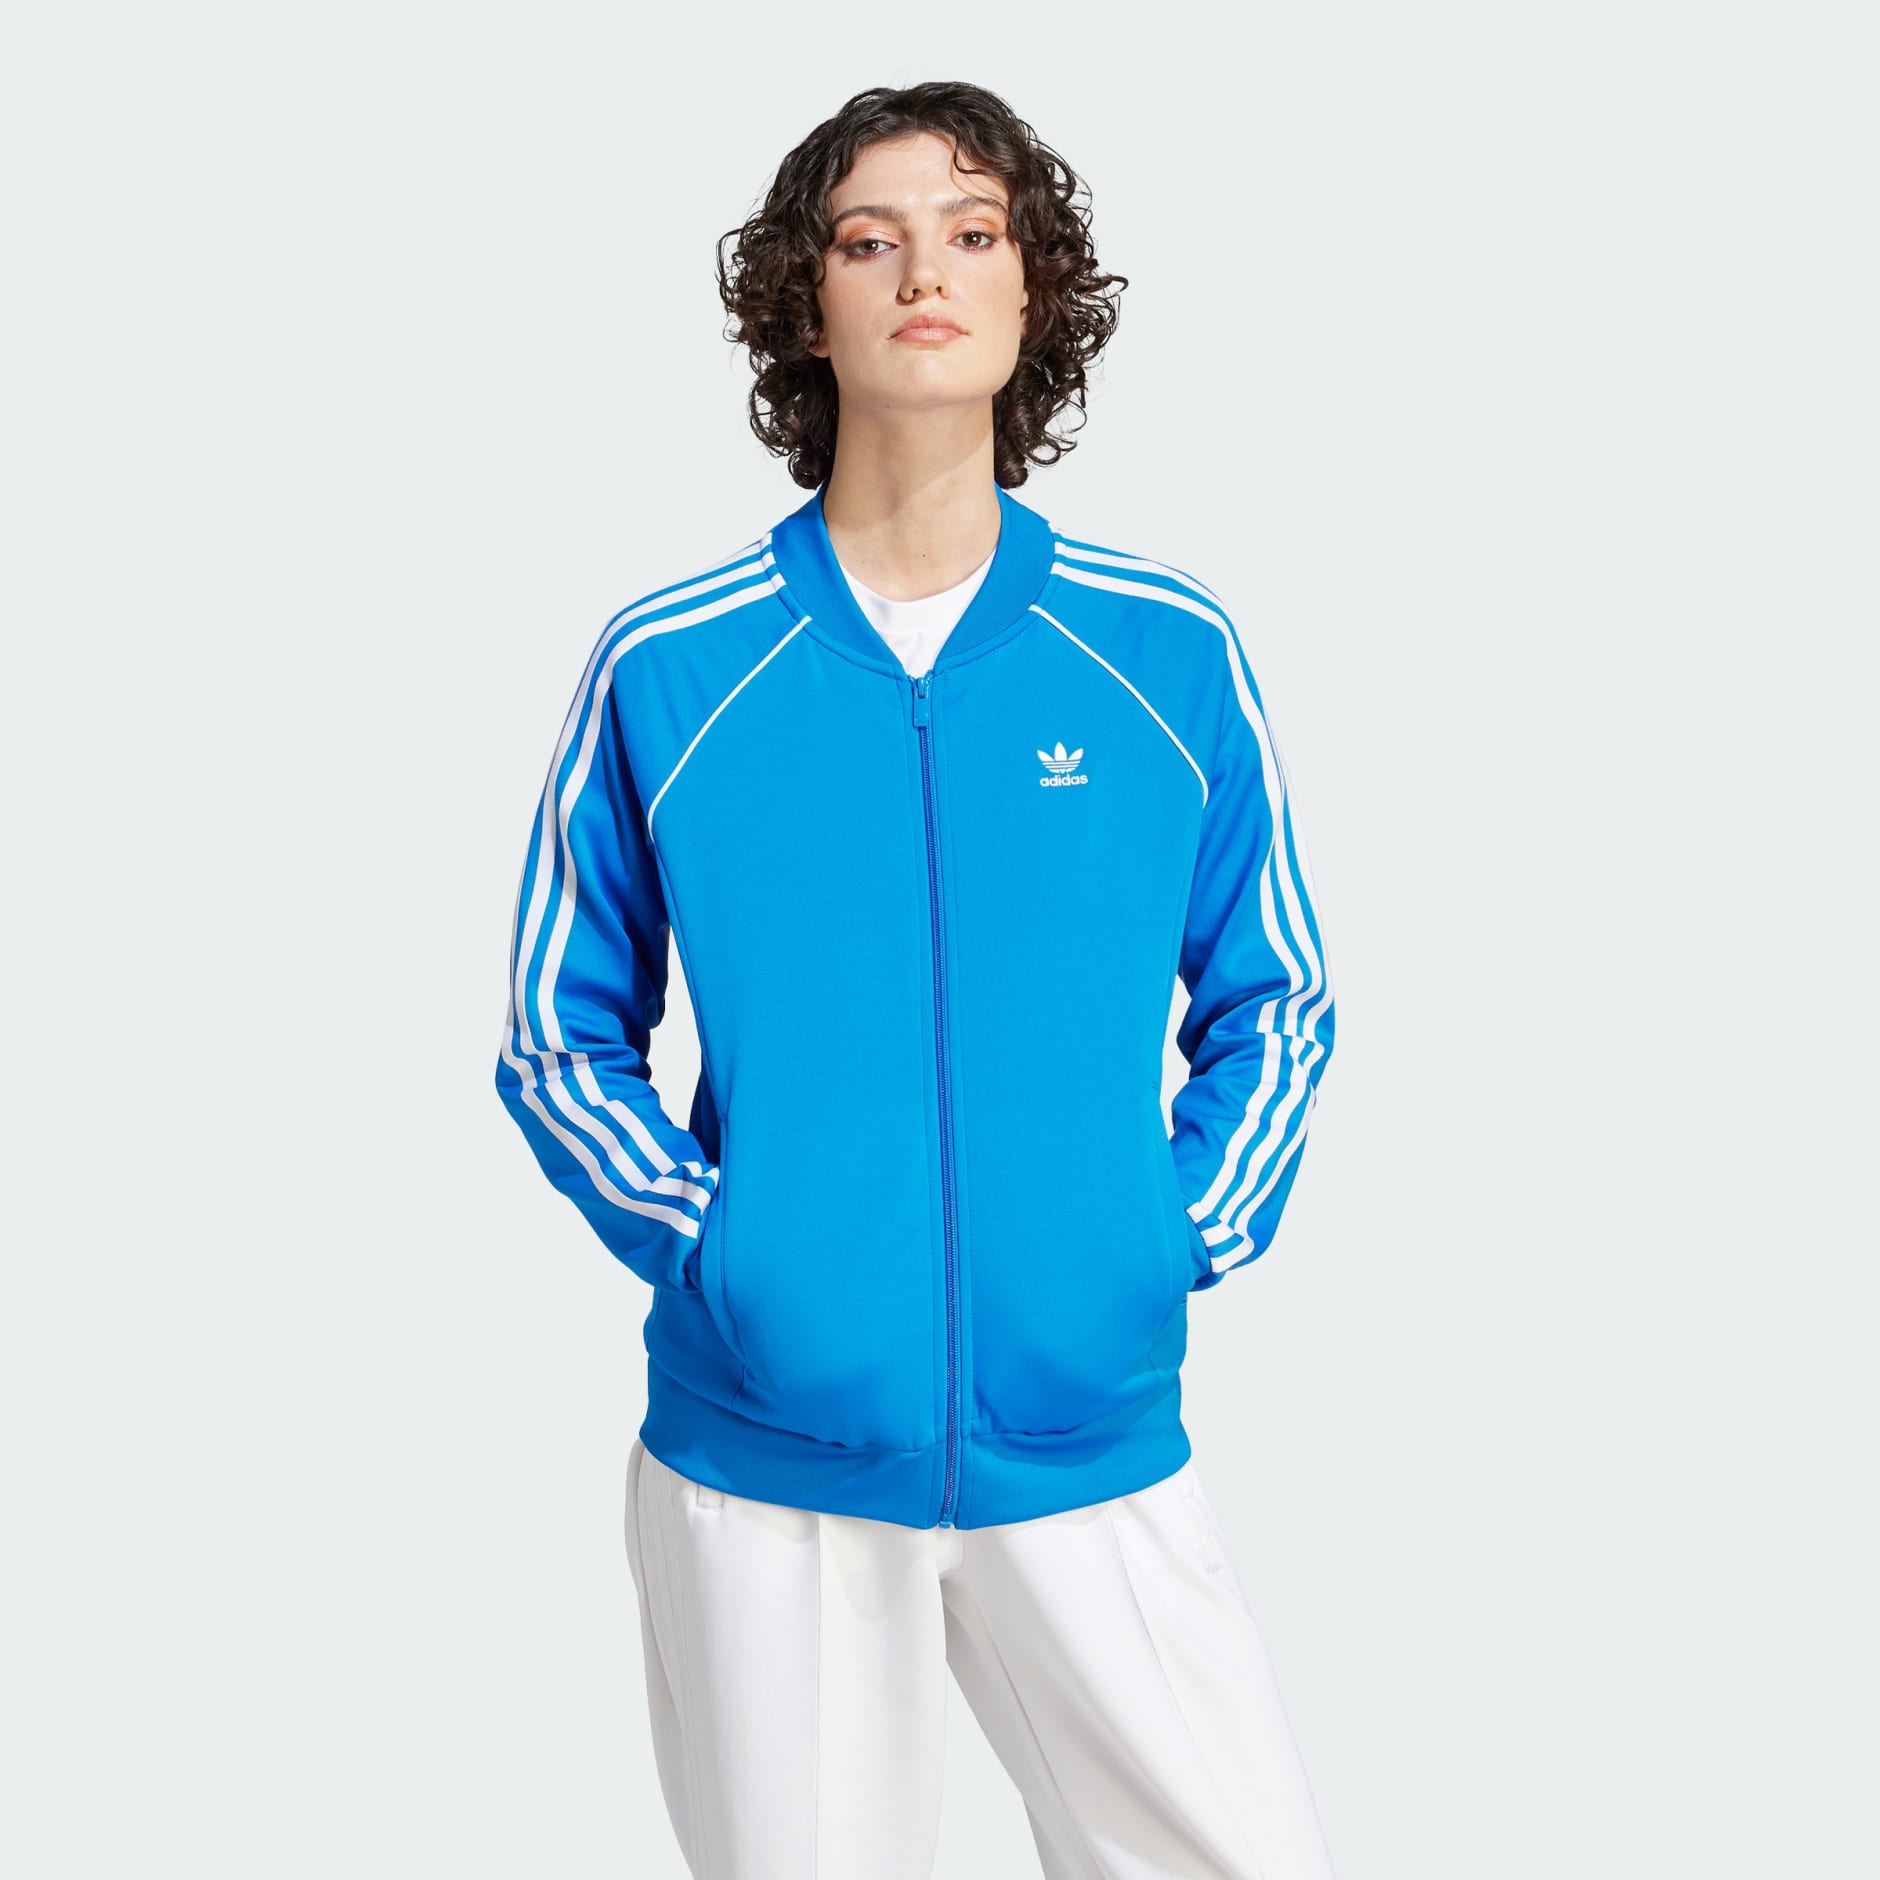 Clothing - Adicolor Classics SST Track Top - Blue | adidas South Africa